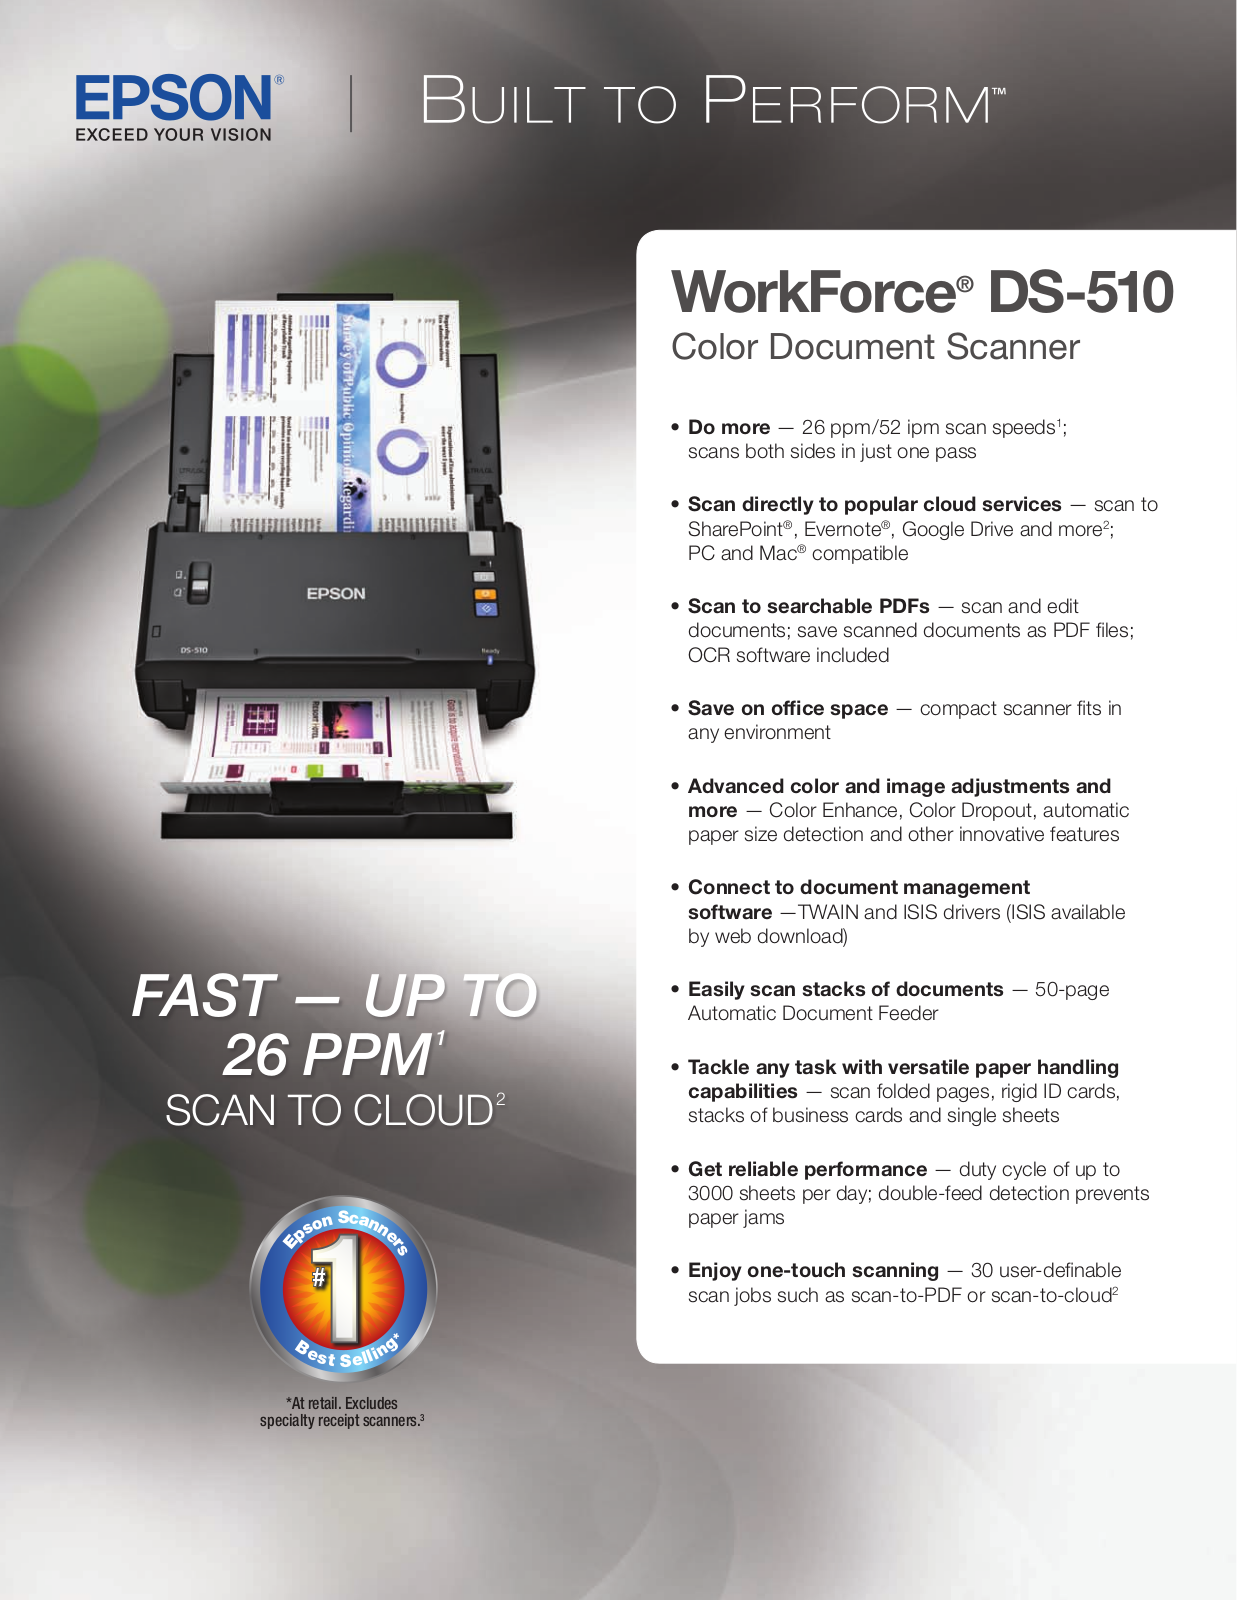 Epson WorkForce DS-510 Color Product Specifications